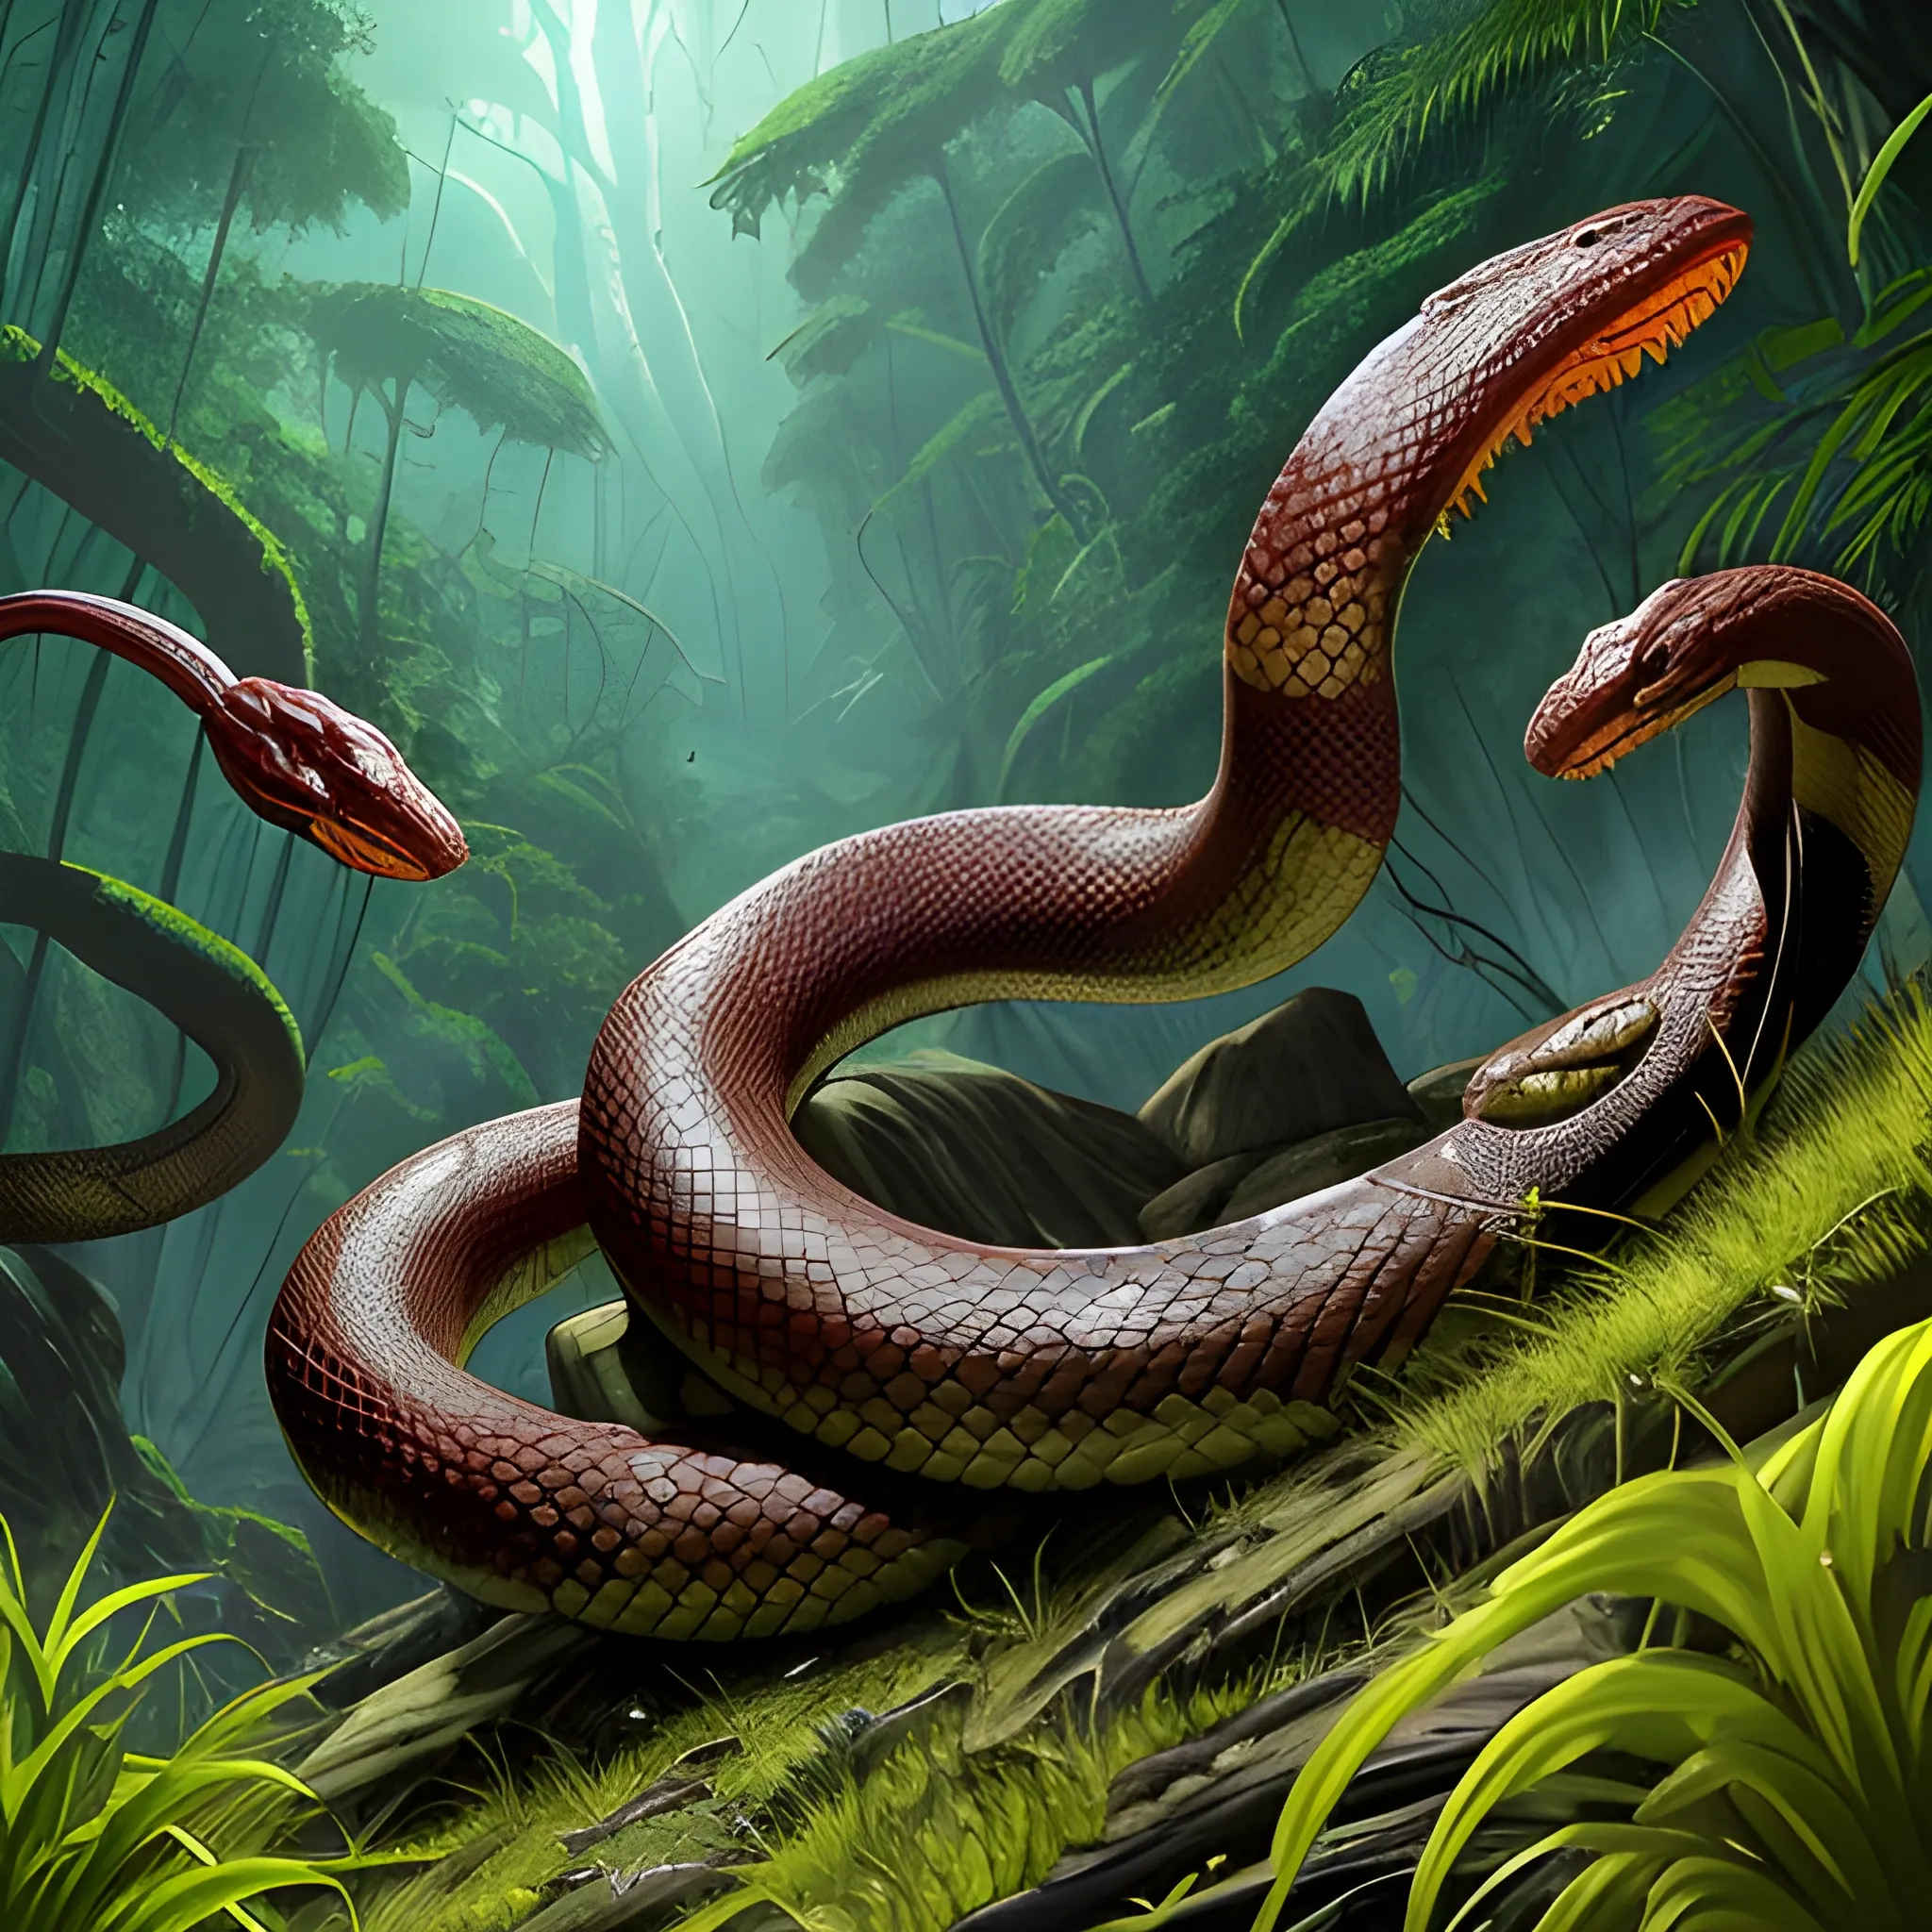 Appearance: The Giant Poisonous Snake is a massive and fearsome reptile, much larger than its smaller counterpart. It has a thick and muscular body, and its scales can have a range of colors, from mottled greens and browns to striking patterns that allow it to blend in with its surroundings. The snake's head is large and triangular, with a pair of long, hollow fangs through which it delivers its potent venom.

Features: The Giant Poisonous Snake is known for its deadly venomous bite, which it uses to incapacitate and devour prey. Its venom is significantly more potent than that of its smaller cousin, making it a formidable threat to adventurers. A bite from a Giant Poisonous Snake can cause severe pain, paralysis, or even death, depending on the creature's size and resilience.

Habitat: Giant Poisonous Snakes typically inhabit dense jungles, dark swamps, and other untamed wilderness areas. They prefer warm and humid environments and may be found in hidden lairs or lurking near water sources. In your DND world, they could guard sacred sites or serve as minions of malevolent beings.

Behavior: Like their smaller counterparts, Giant Poisonous Snakes are stealthy predators, using their large size and camouflage to ambush prey. They strike swiftly and accurately, delivering their venom to immobilize their victims before consuming them. While generally non-aggressive, they may attack if they feel threatened or if potential prey ventures too close.

Role in the World: In your DND world, Giant Poisonous Snakes could be apex predators in their habitat, feared and respected by other creatures. They might be associated with ancient legends or guarded by nature spirits. Druids and rangers might view them as symbols of balance and the wild's dangers.

Encountering a Giant Poisonous Snake in the wild is a perilous and potentially deadly event for adventurers. The snake's venomous bite can have severe consequences, making quick thinking and decisive action essential to survive an encounter. Players must be well-prepared with protective spells, antidotes, or other means to counteract the venom's effects.

The presence of Giant Poisonous Snakes in your campaign can create an atmosphere of danger and suspense, particularly in jungles or other untamed regions. Players will need to be vigilant and cautious during their explorations, as the looming threat of these massive venomous serpents adds an element of peril to their adventures. Giant Poisonous Snakes can serve as significant challenges for higher-level adventurers, reminding them of the dangers that still lurk even in seemingly familiar environments.